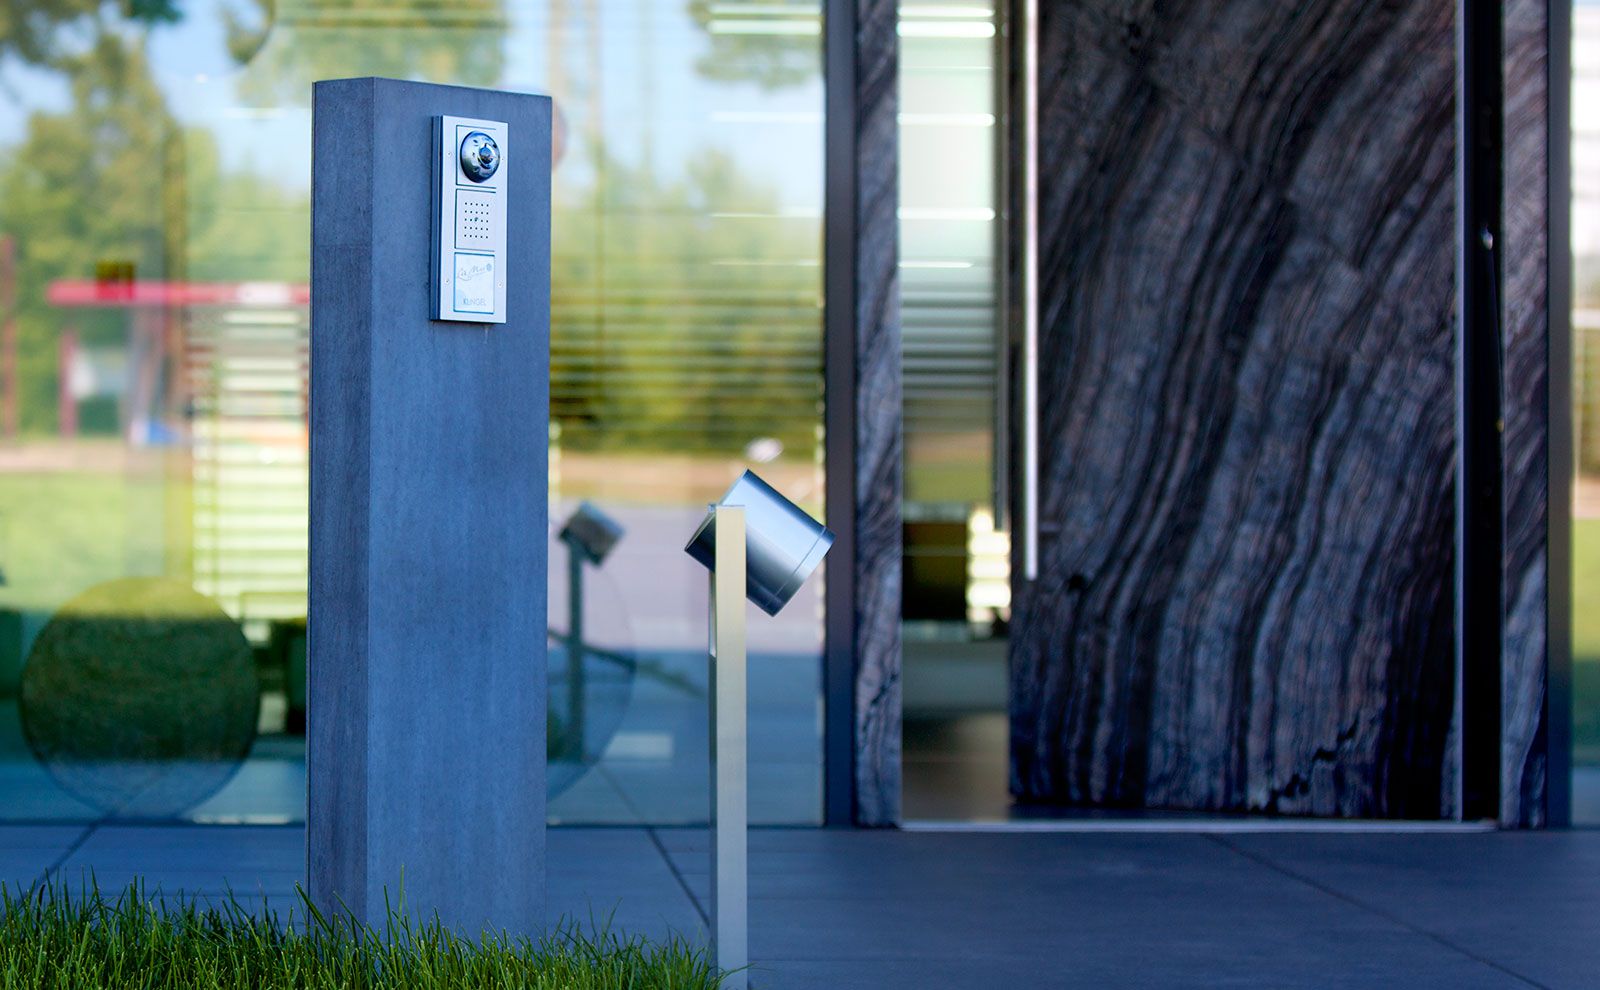 With the Gira door station, you will know immediately who's ringing your bell. Water-proof and engravable surface in high-quality design.